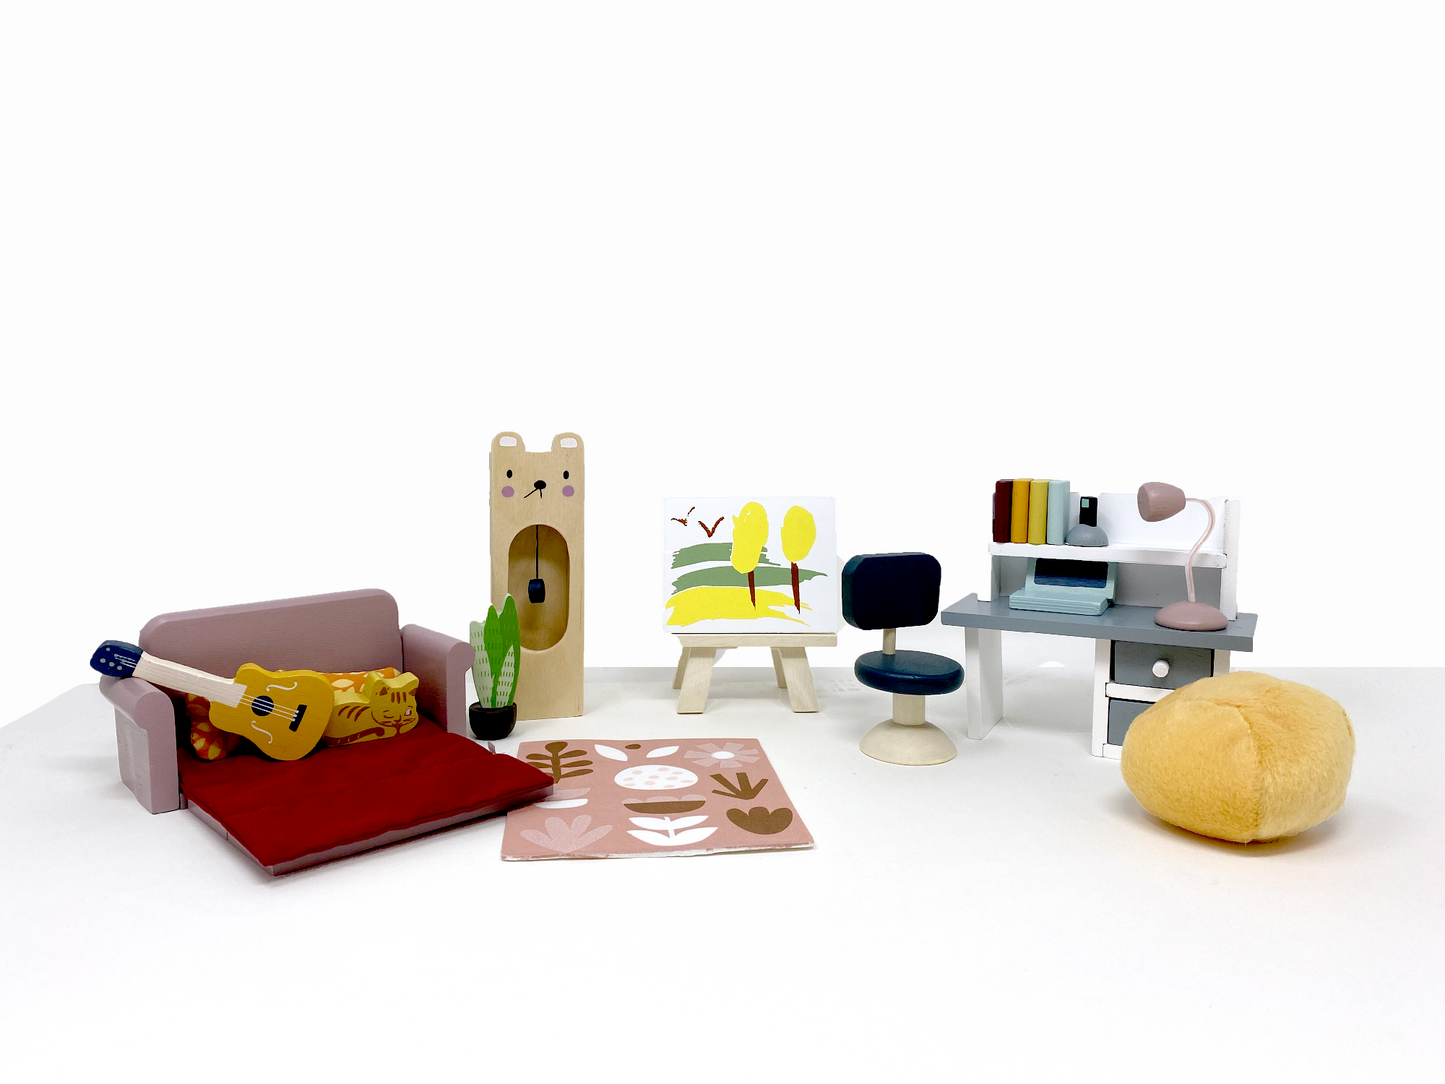 Dollhouse study furniture with clock, beanbag, couch, artist easel, and desk